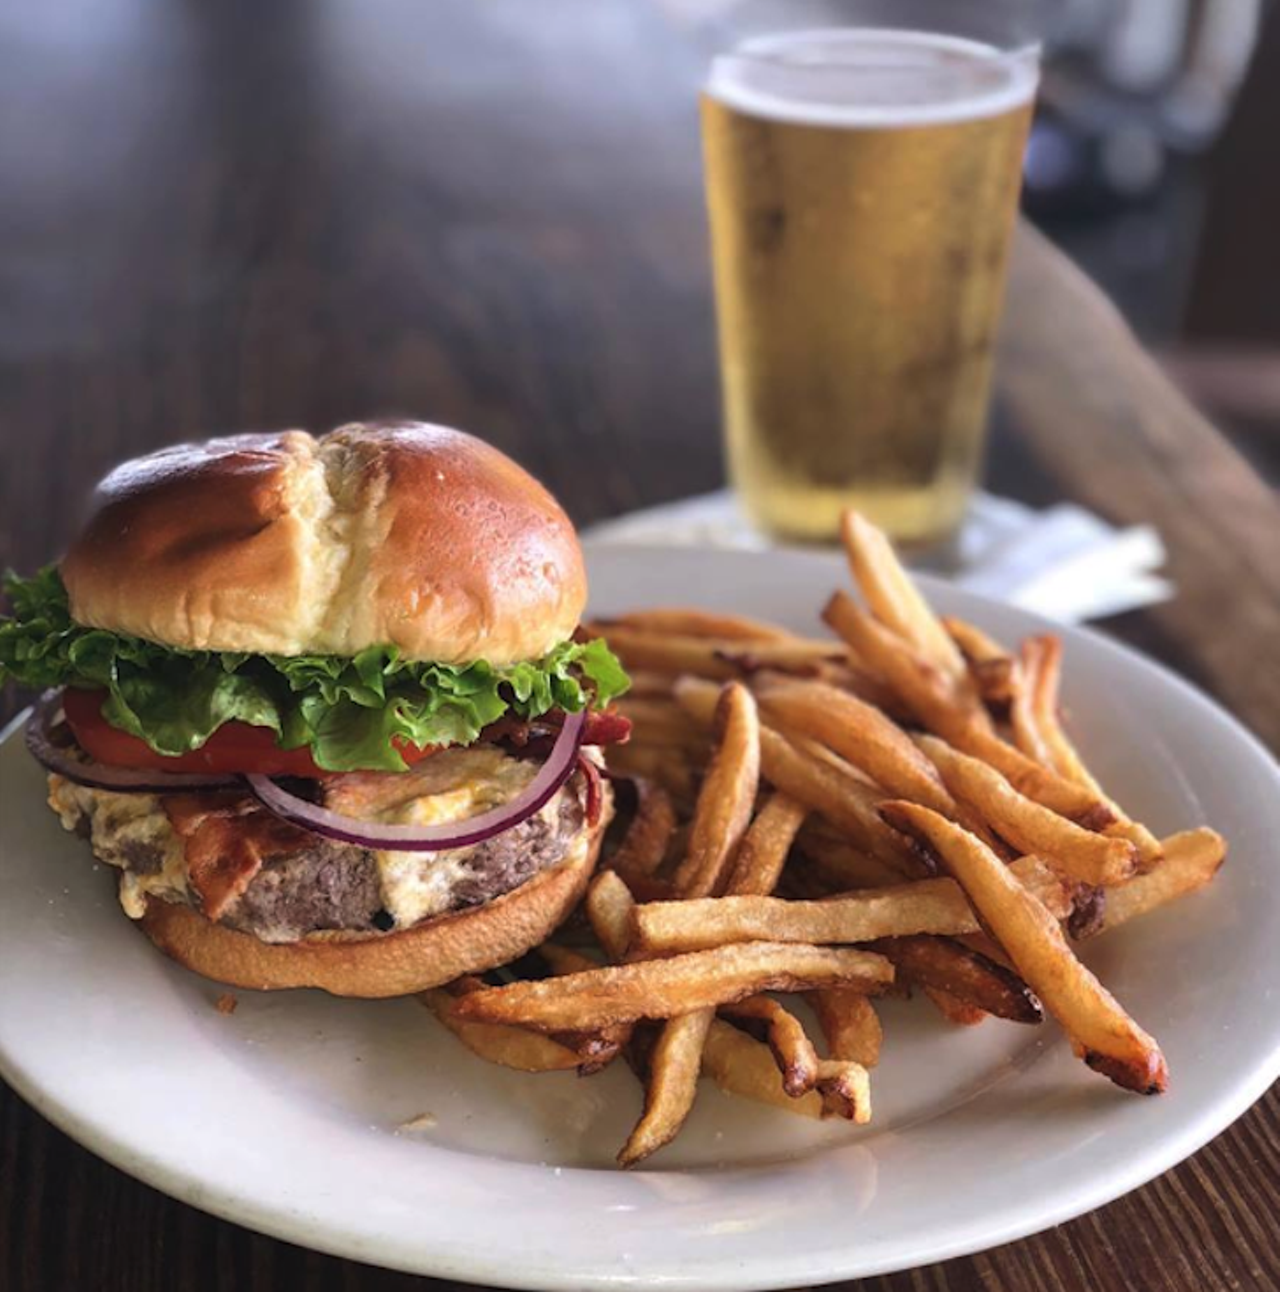 Hog Island Fish Camp  
900 Broadway Ave, Dunedin, 727-736-1179
Dying for fresh dish? Hog Island has &#145;em by the boatload. You&#146;ll want to take a trip for the Hog fish slider and stay for the seven breweries that are within walking distance.
Photo via Hog Island Fish Camp/Facebook